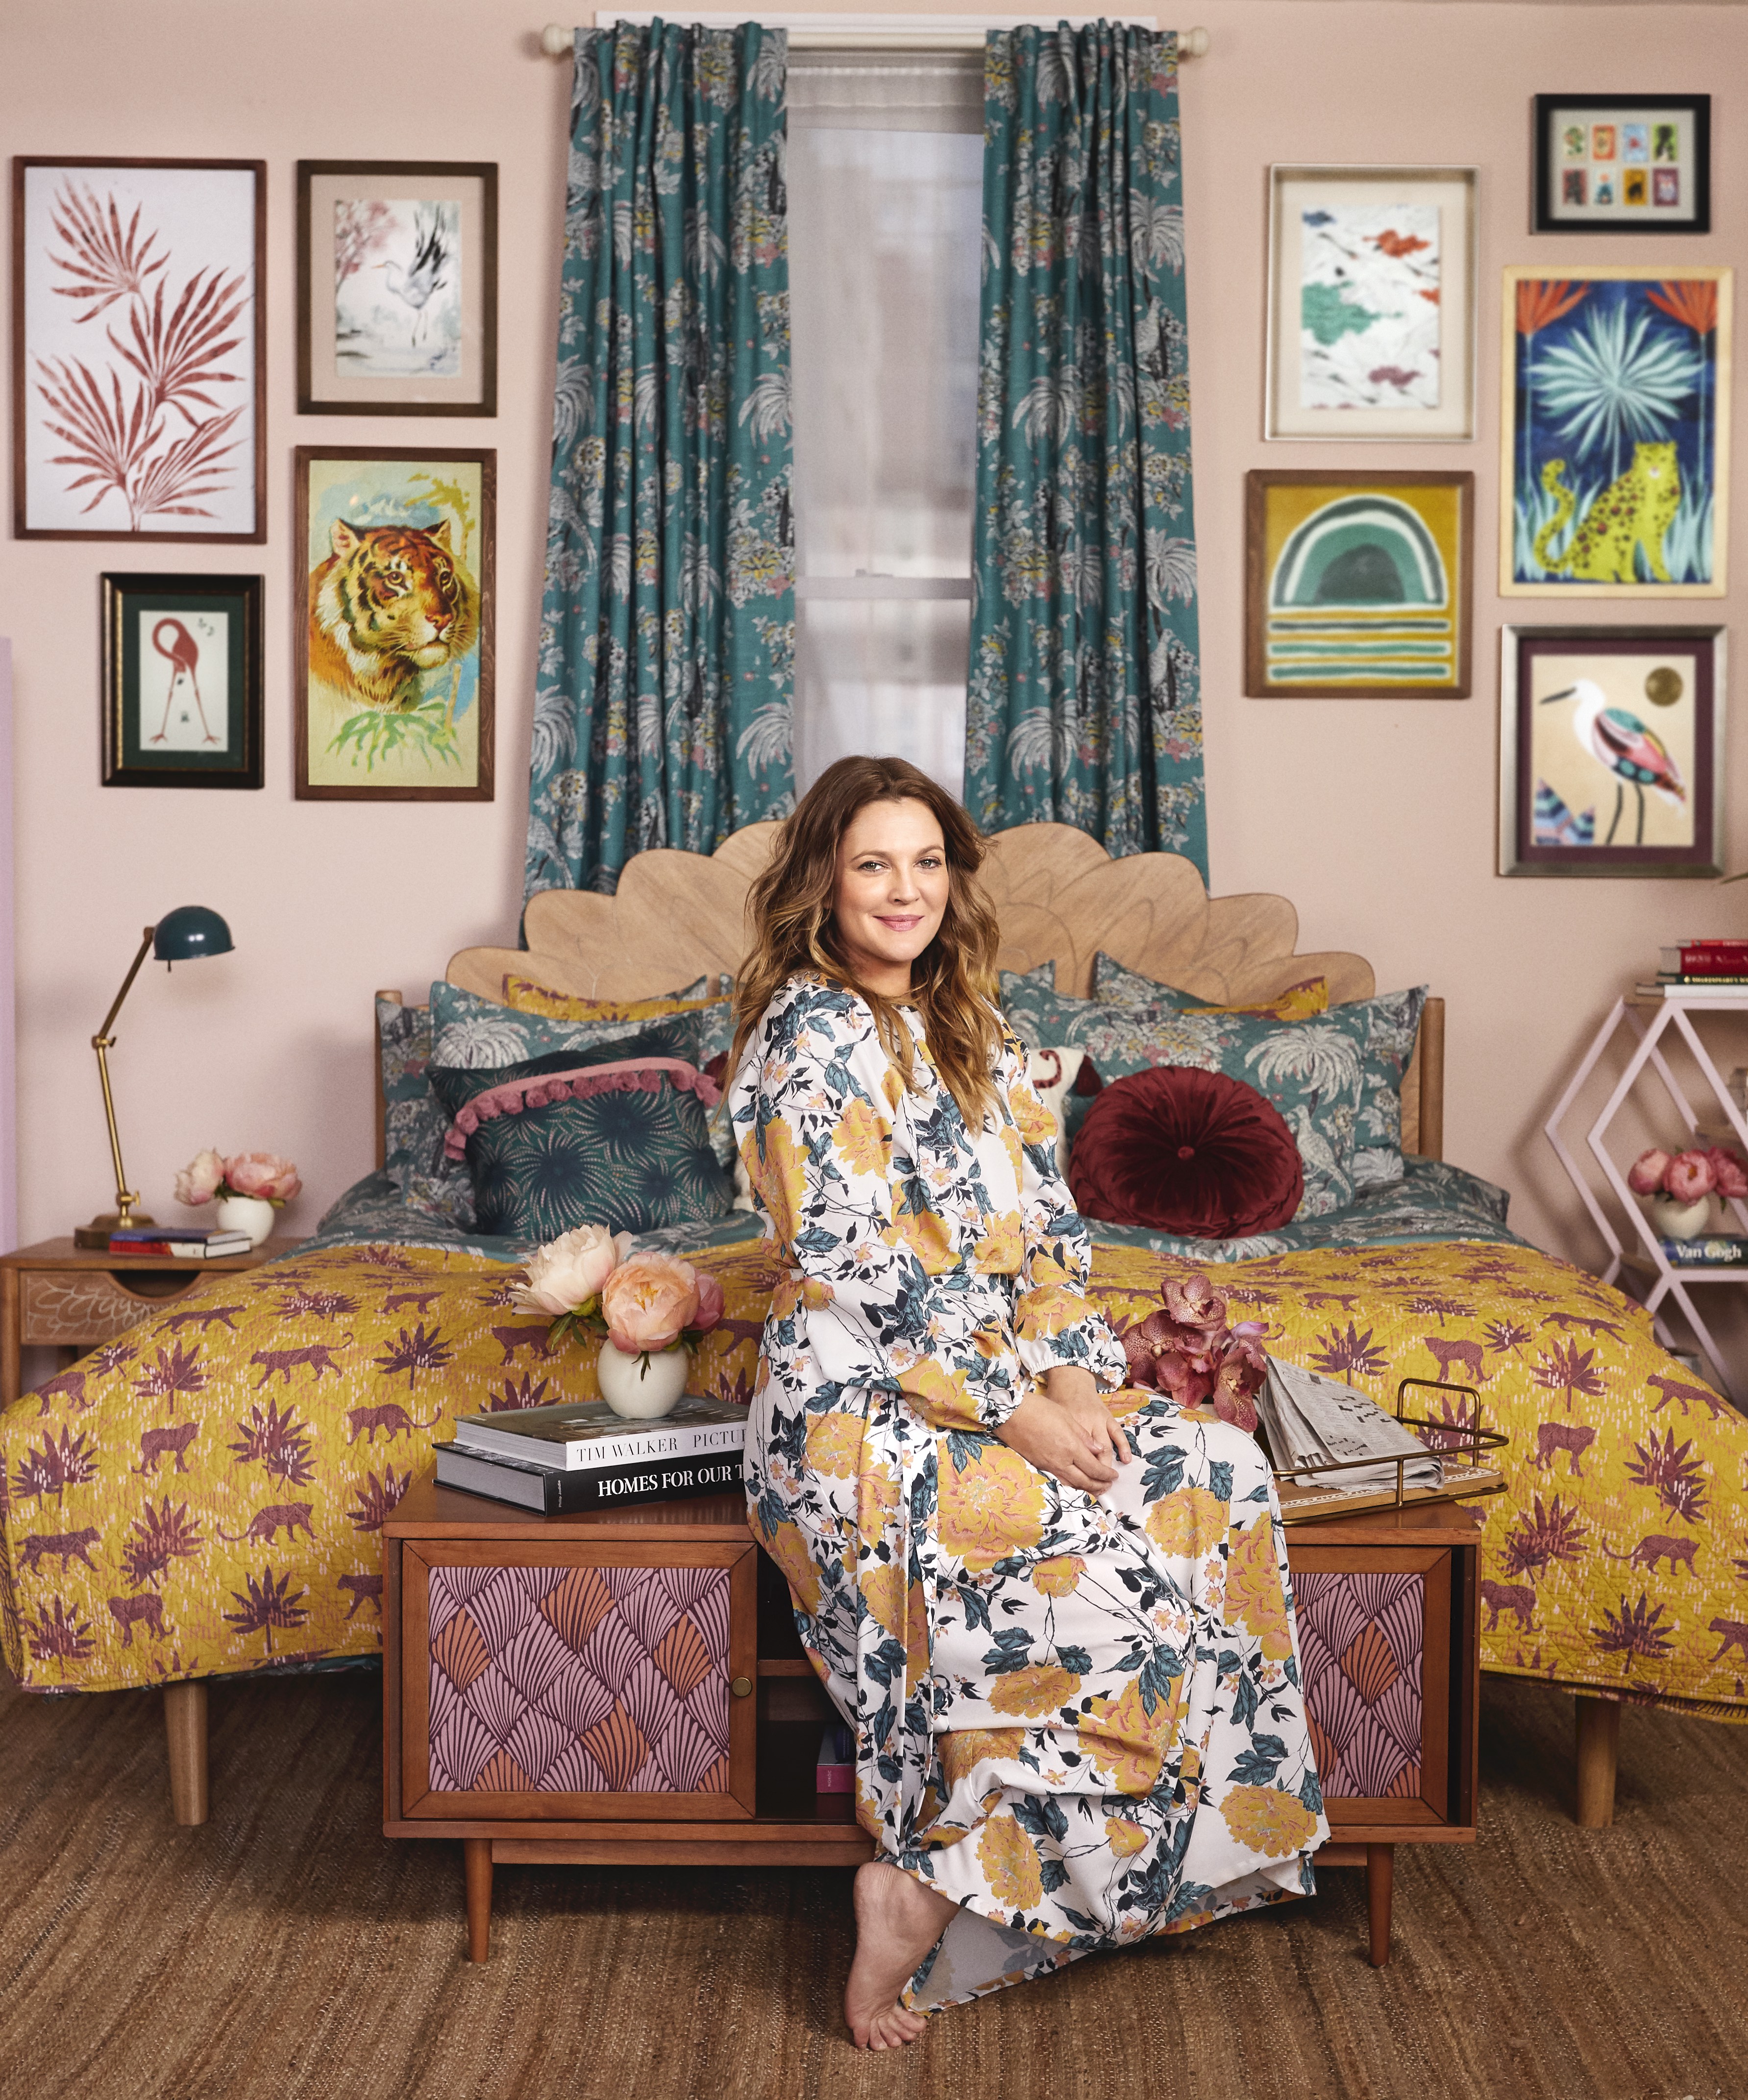 Drew Barrymore in a colorful room full of Flower Home decor.